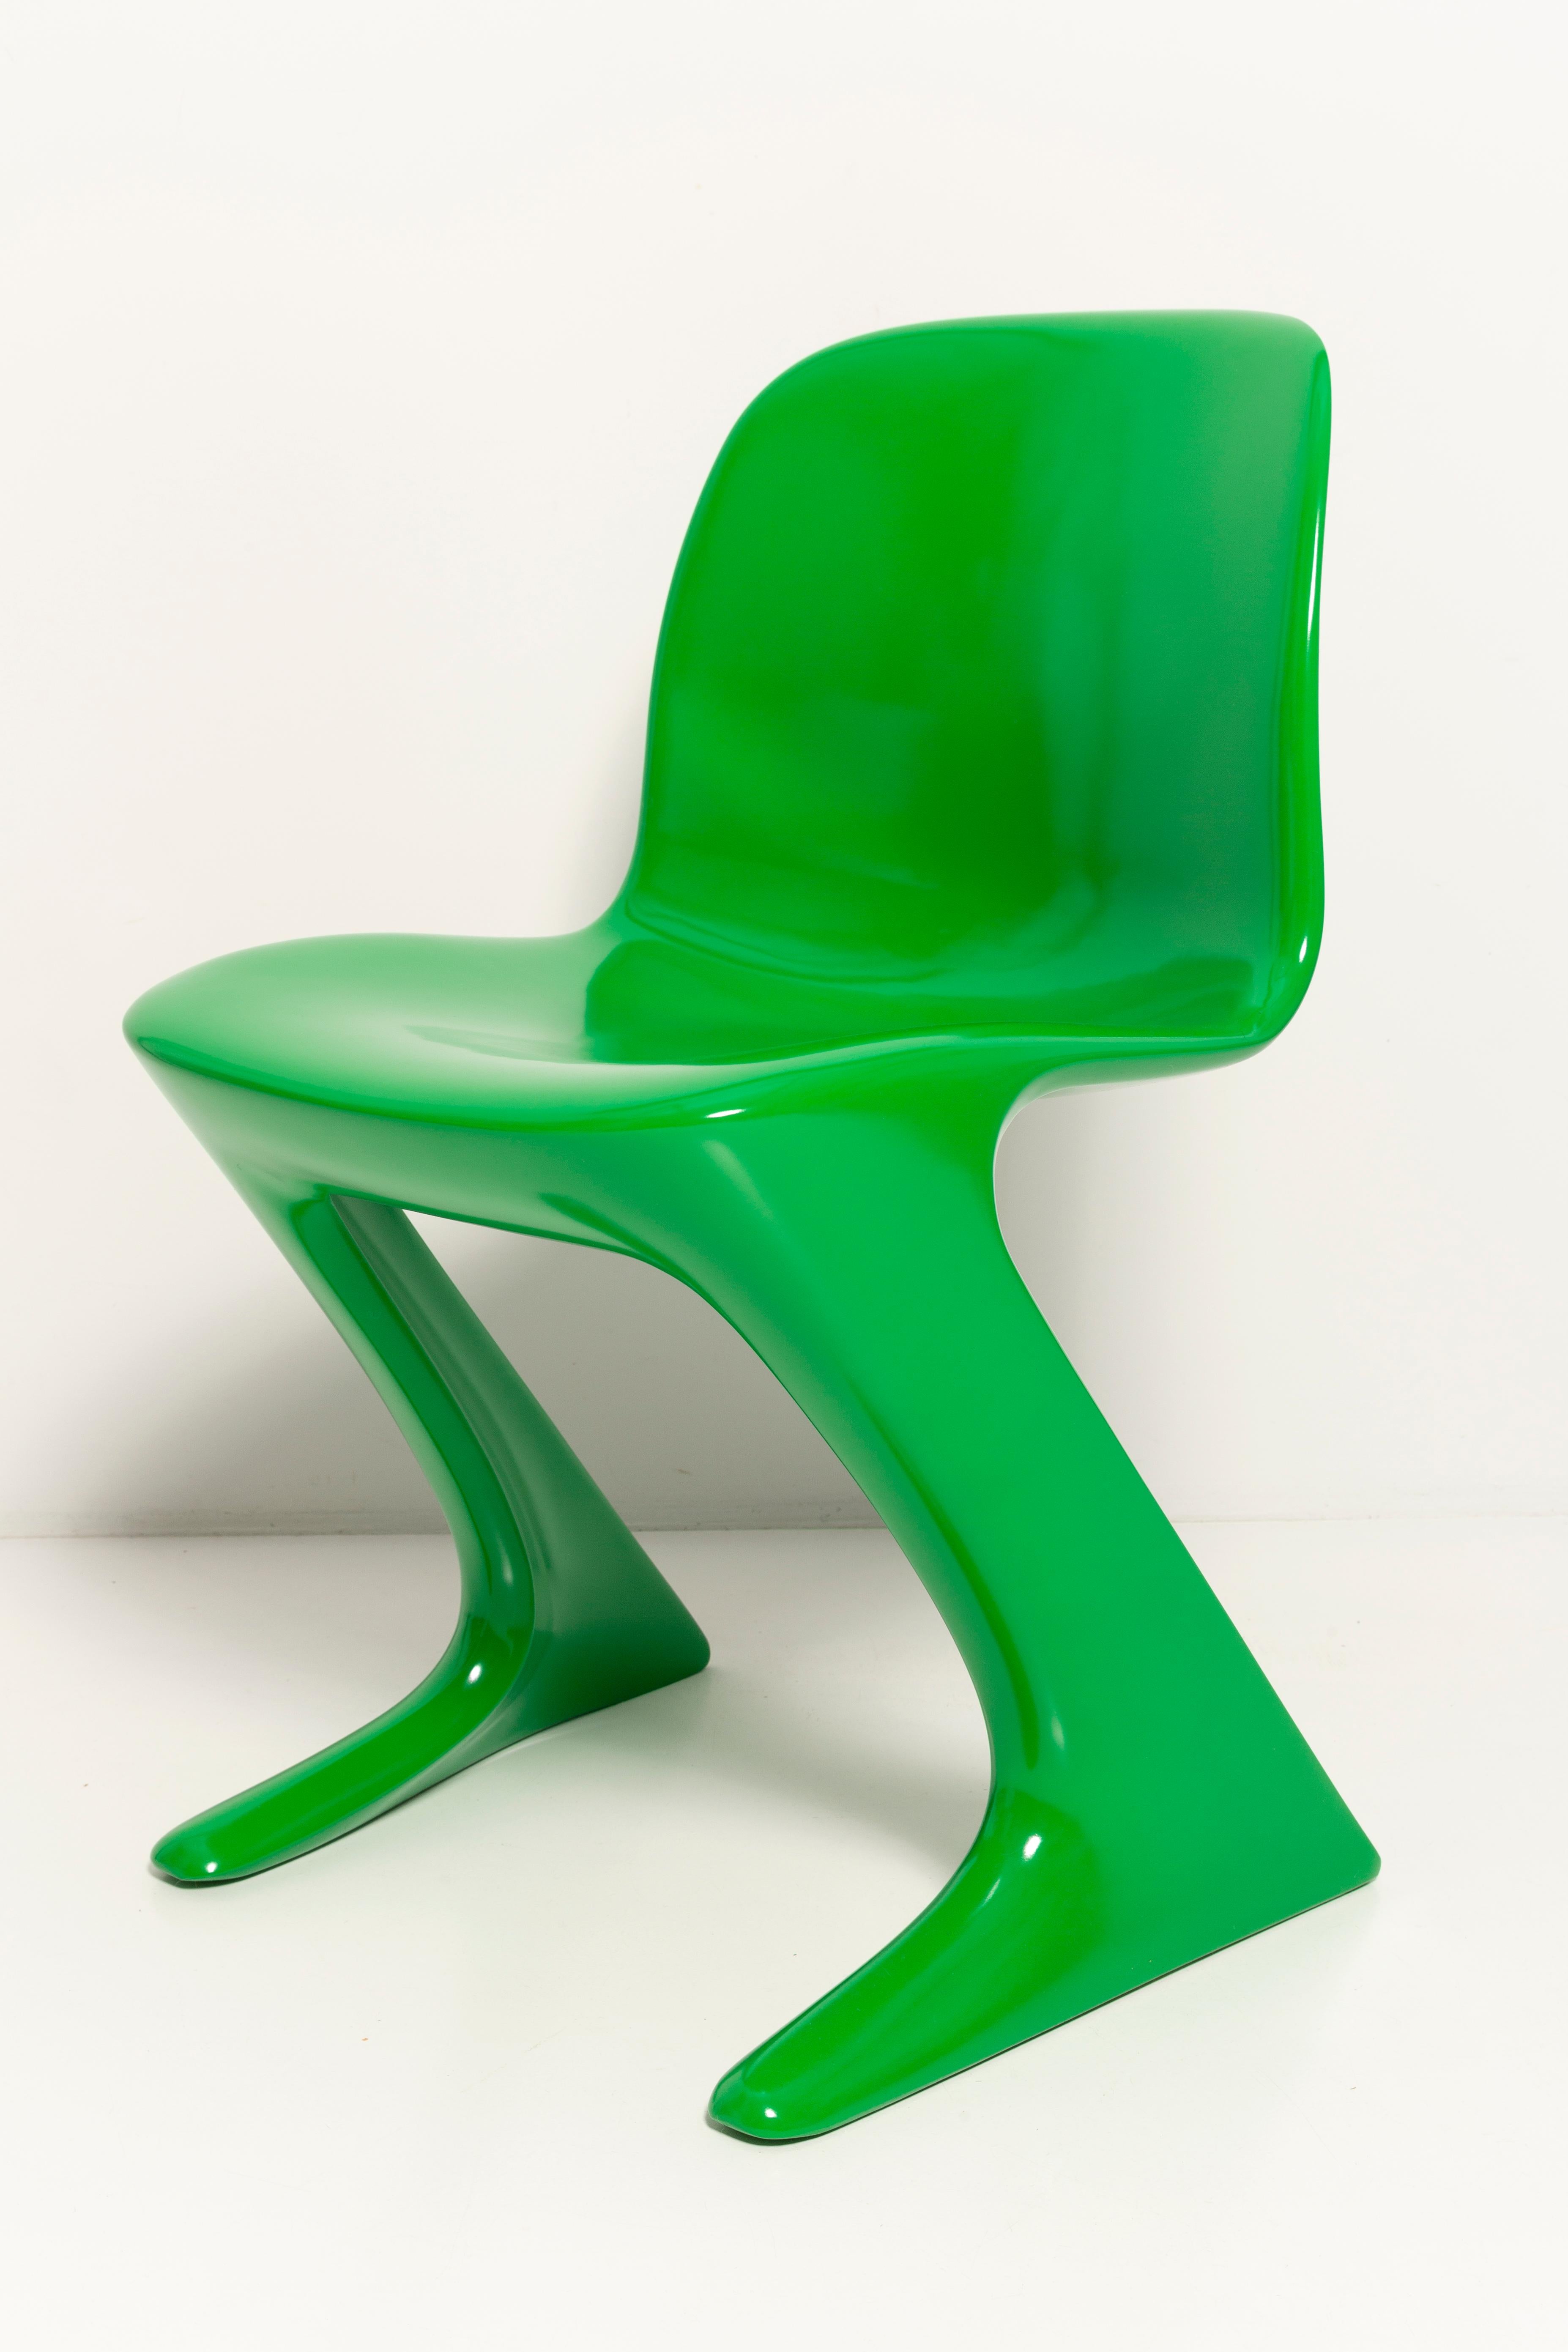 Fiberglass Set of Eight Green Kangaroo Chairs Designed by Ernst Moeckl, Germany, 1960s For Sale